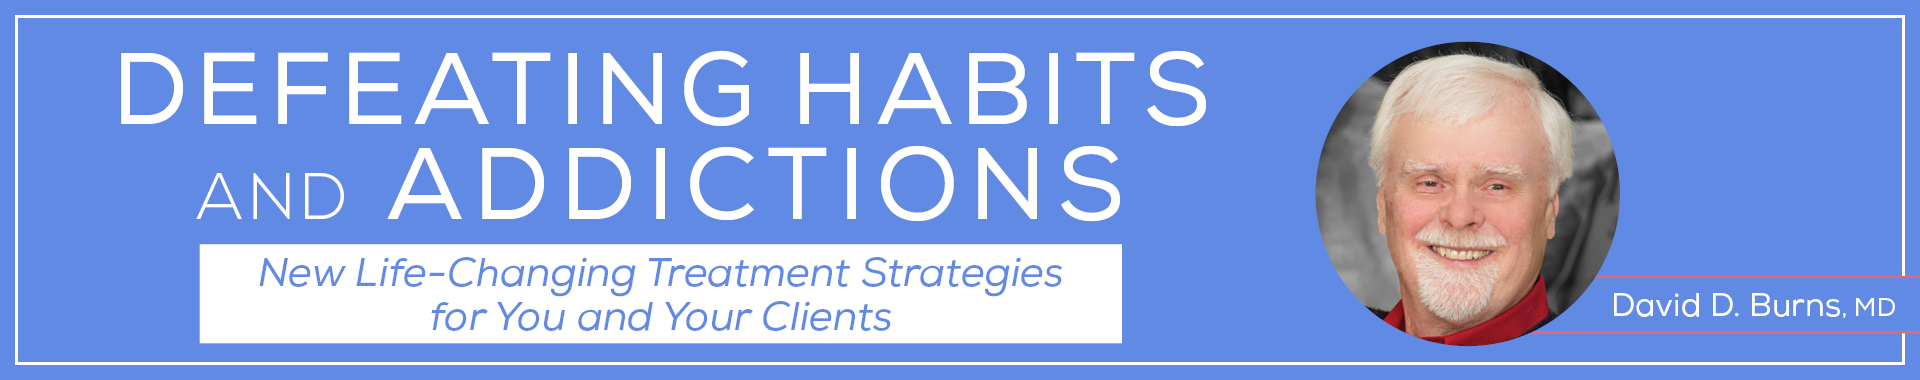 Defeating Habits and Addictions: New Life-Changing Treatment Strategies for You and Your Clients